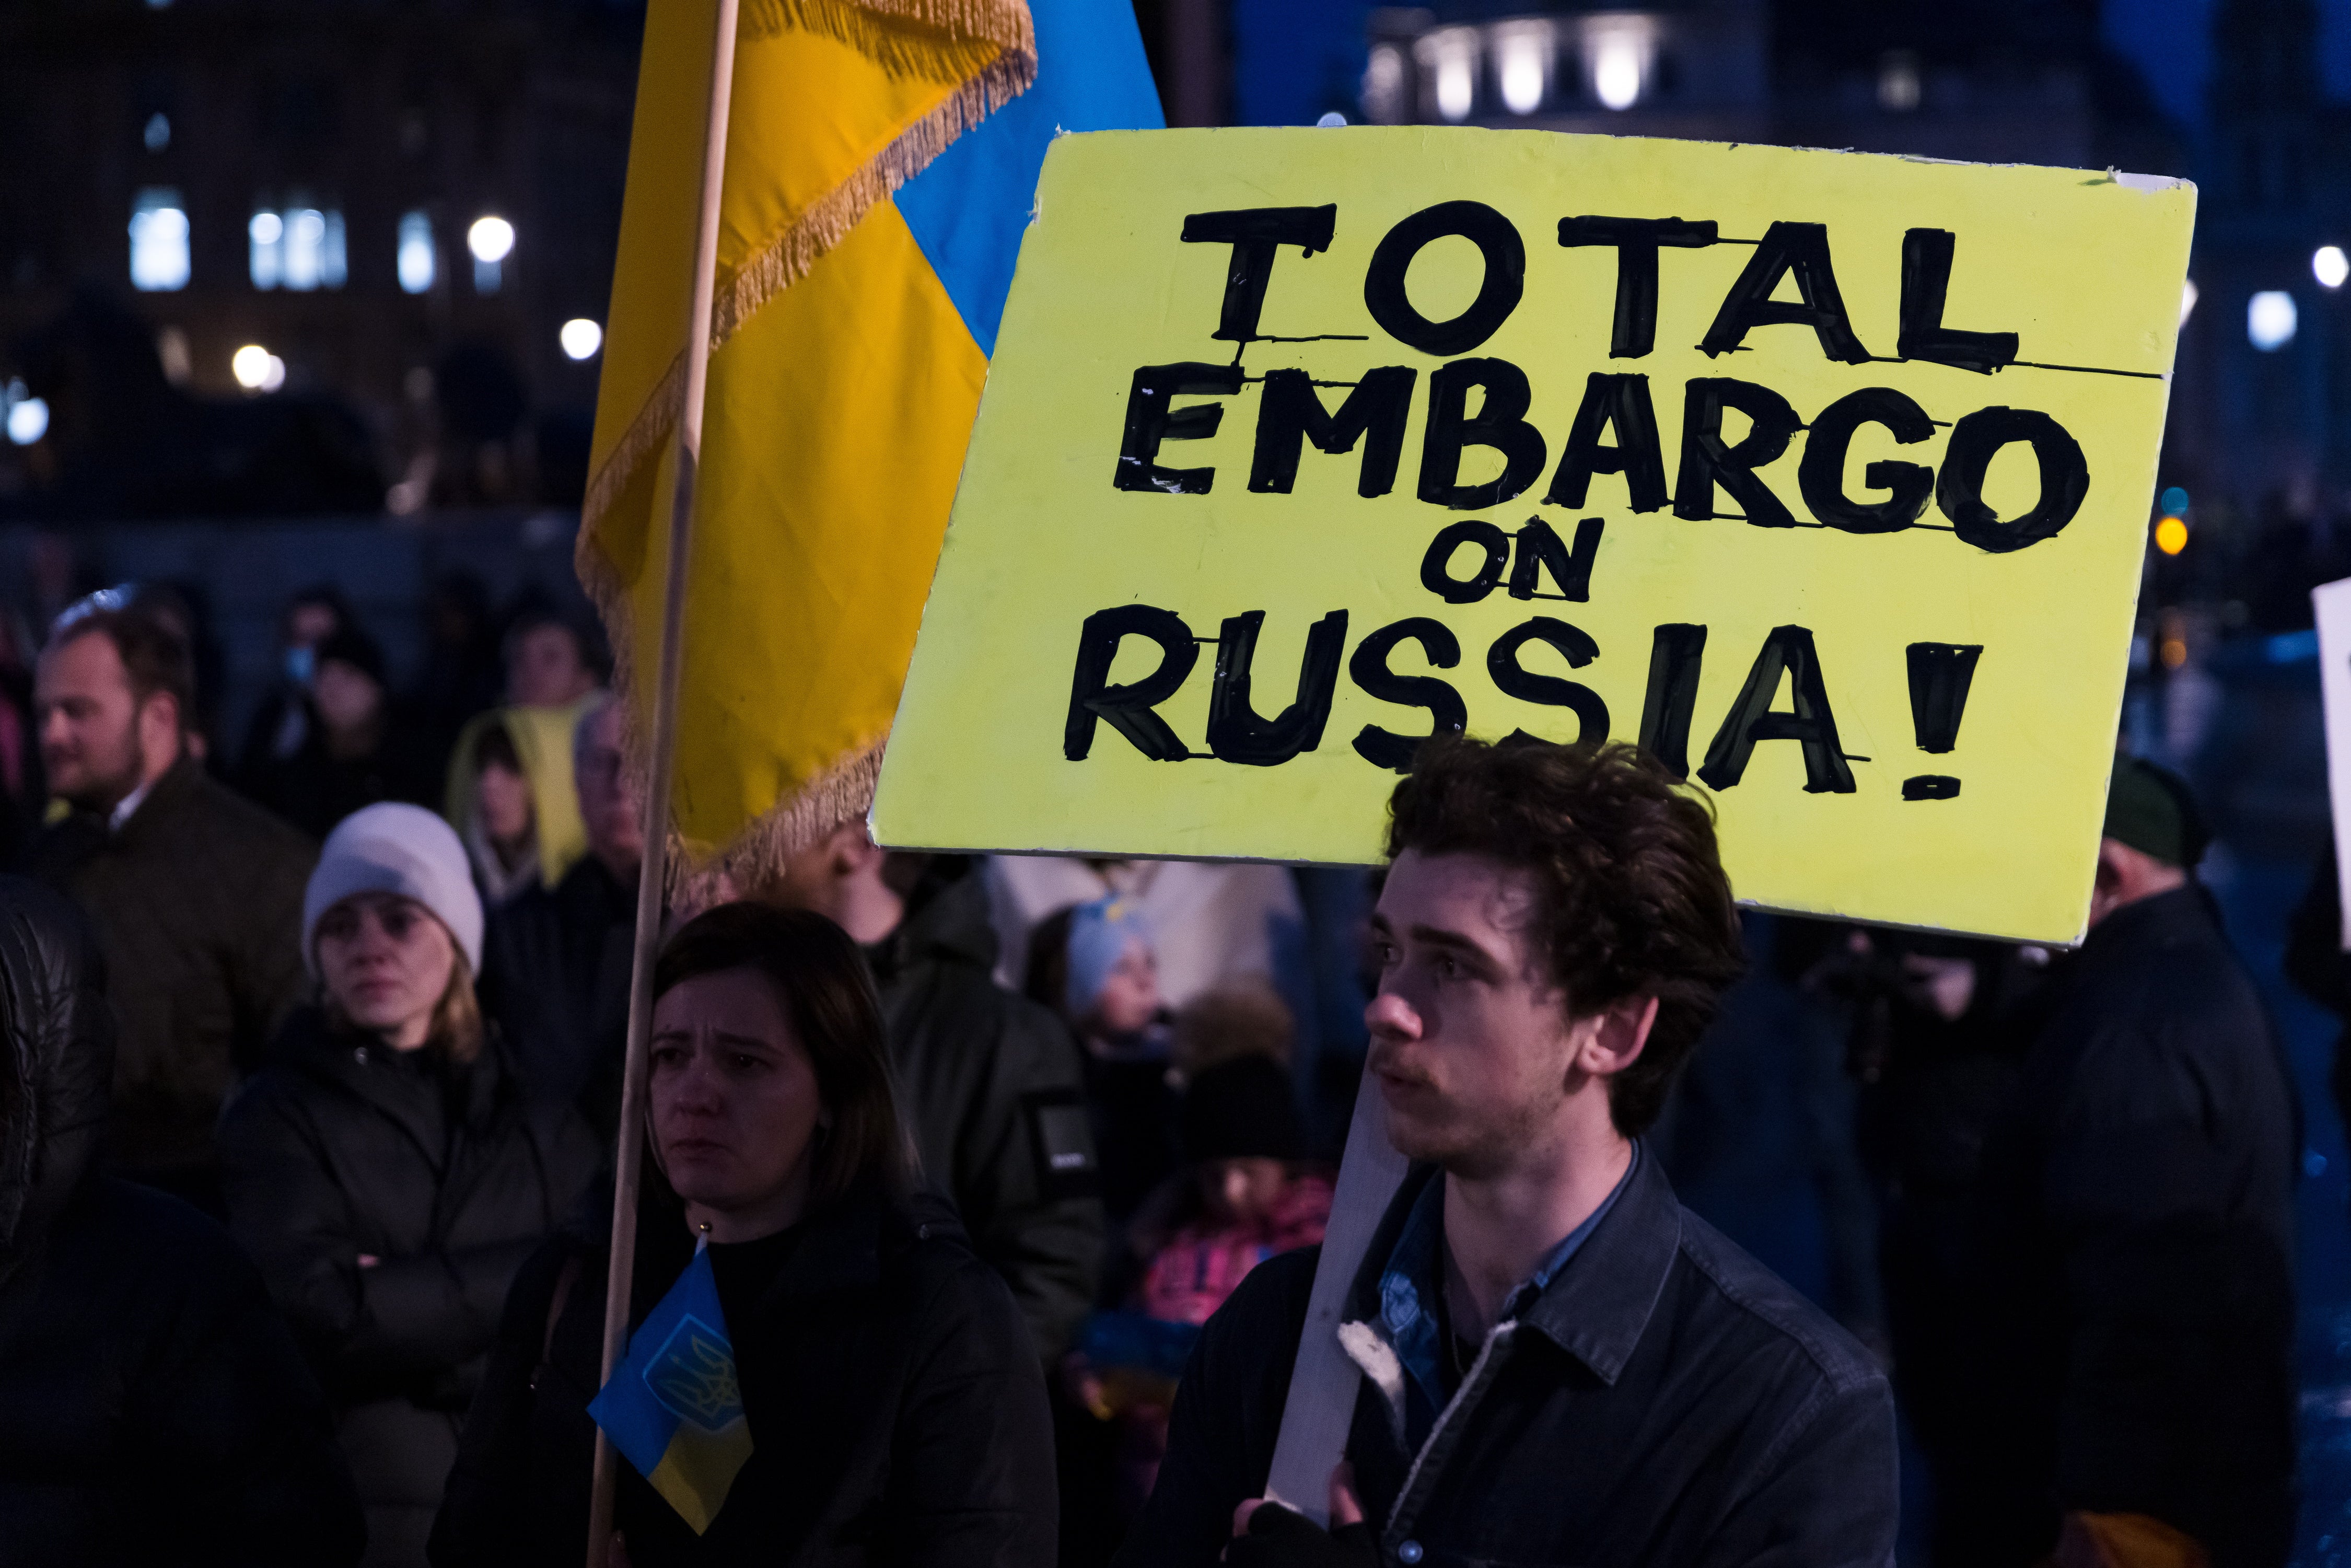 There have been protests across the world in support of Ukraine